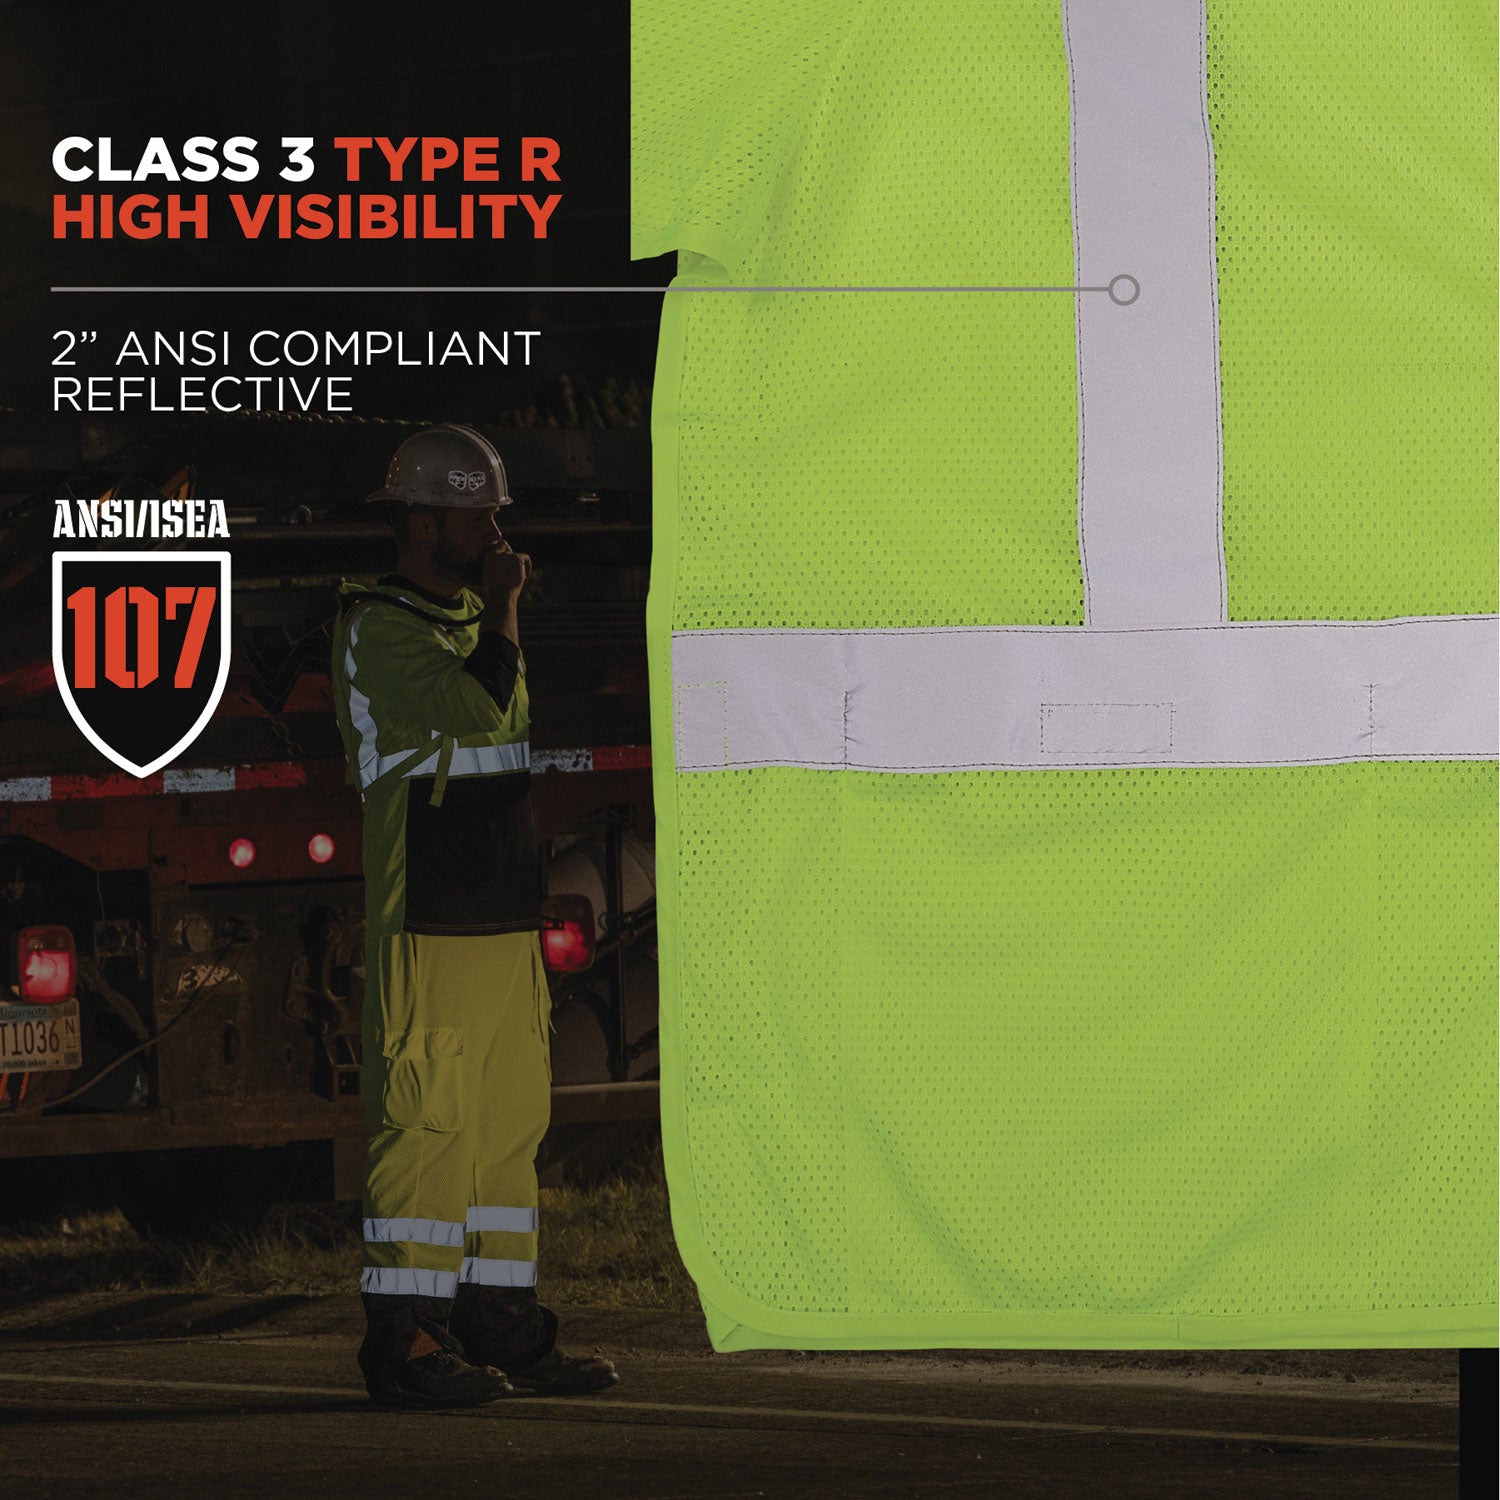 glowear-8315ba-class-3-hi-vis-breakaway-safety-vest-4x-large-to-5x-large-lime-ships-in-1-3-business-days_ego23059 - 3